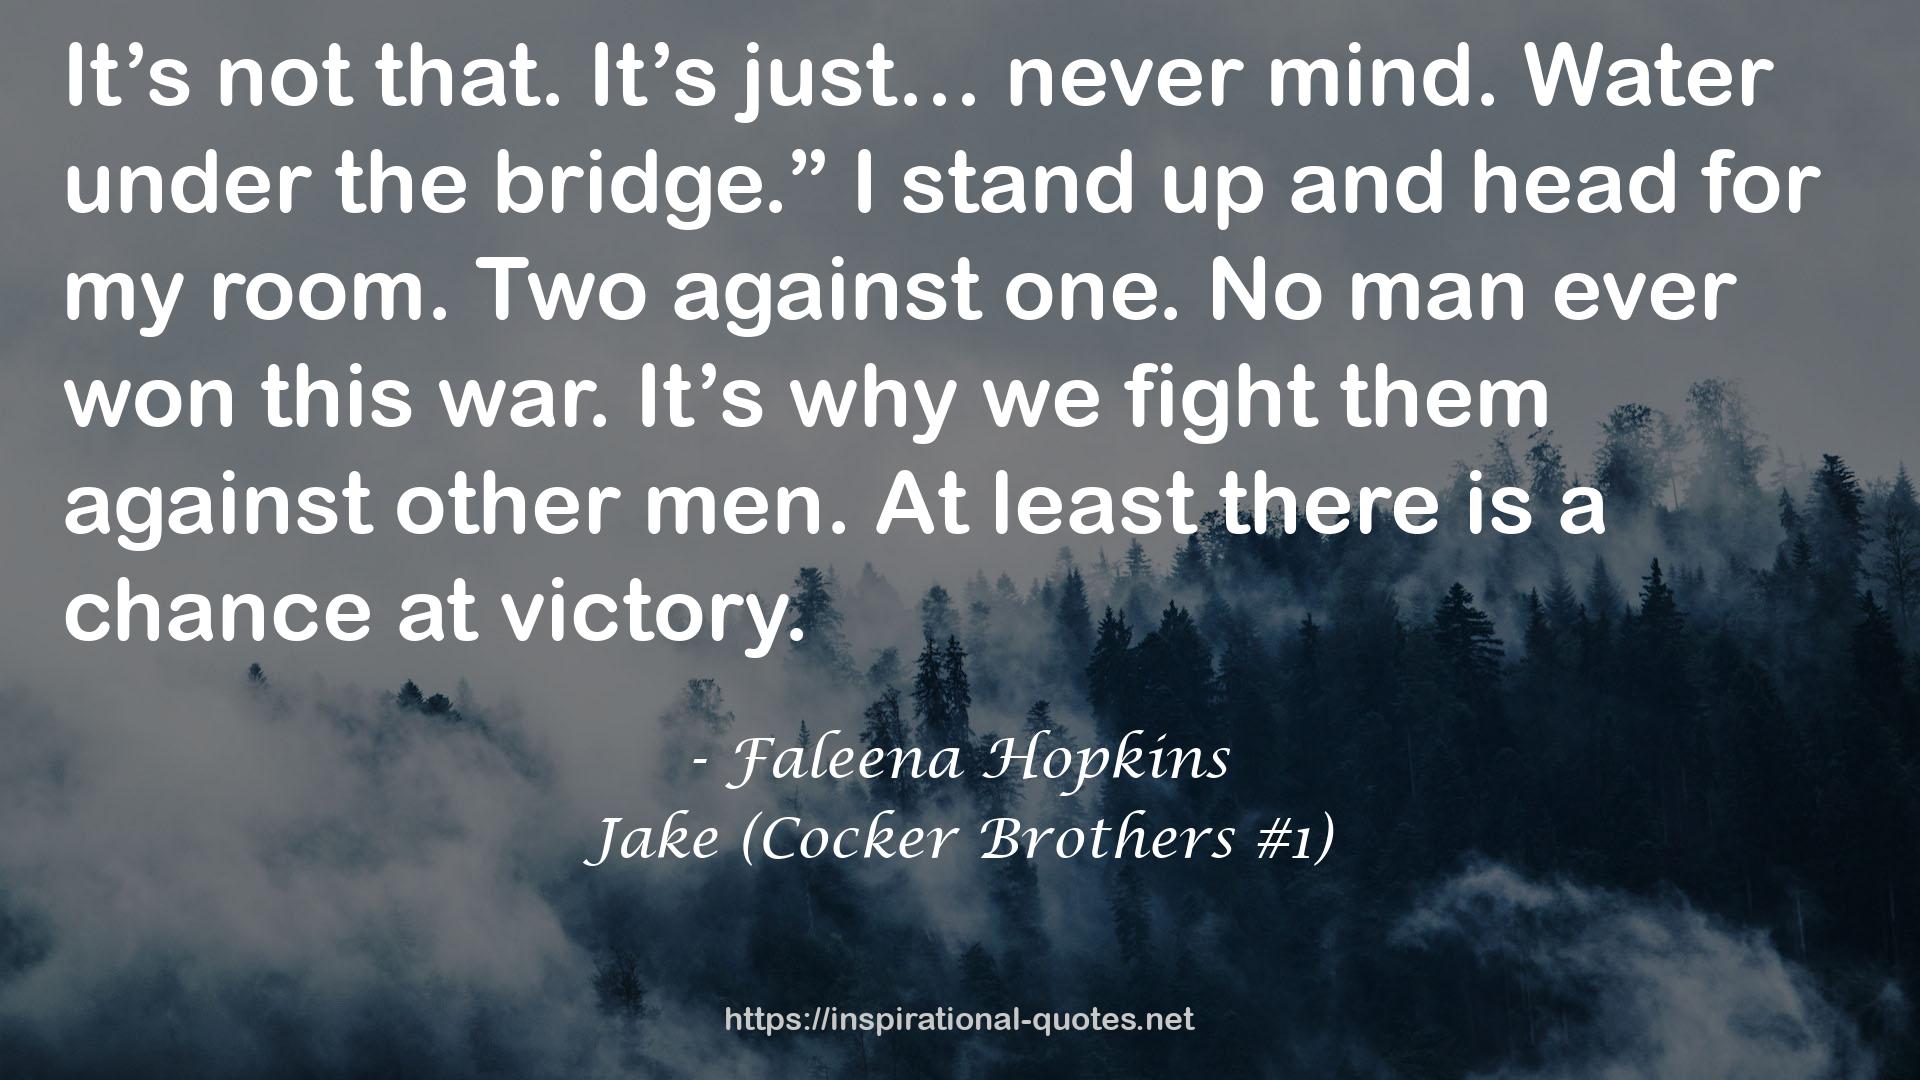 Jake (Cocker Brothers #1) QUOTES